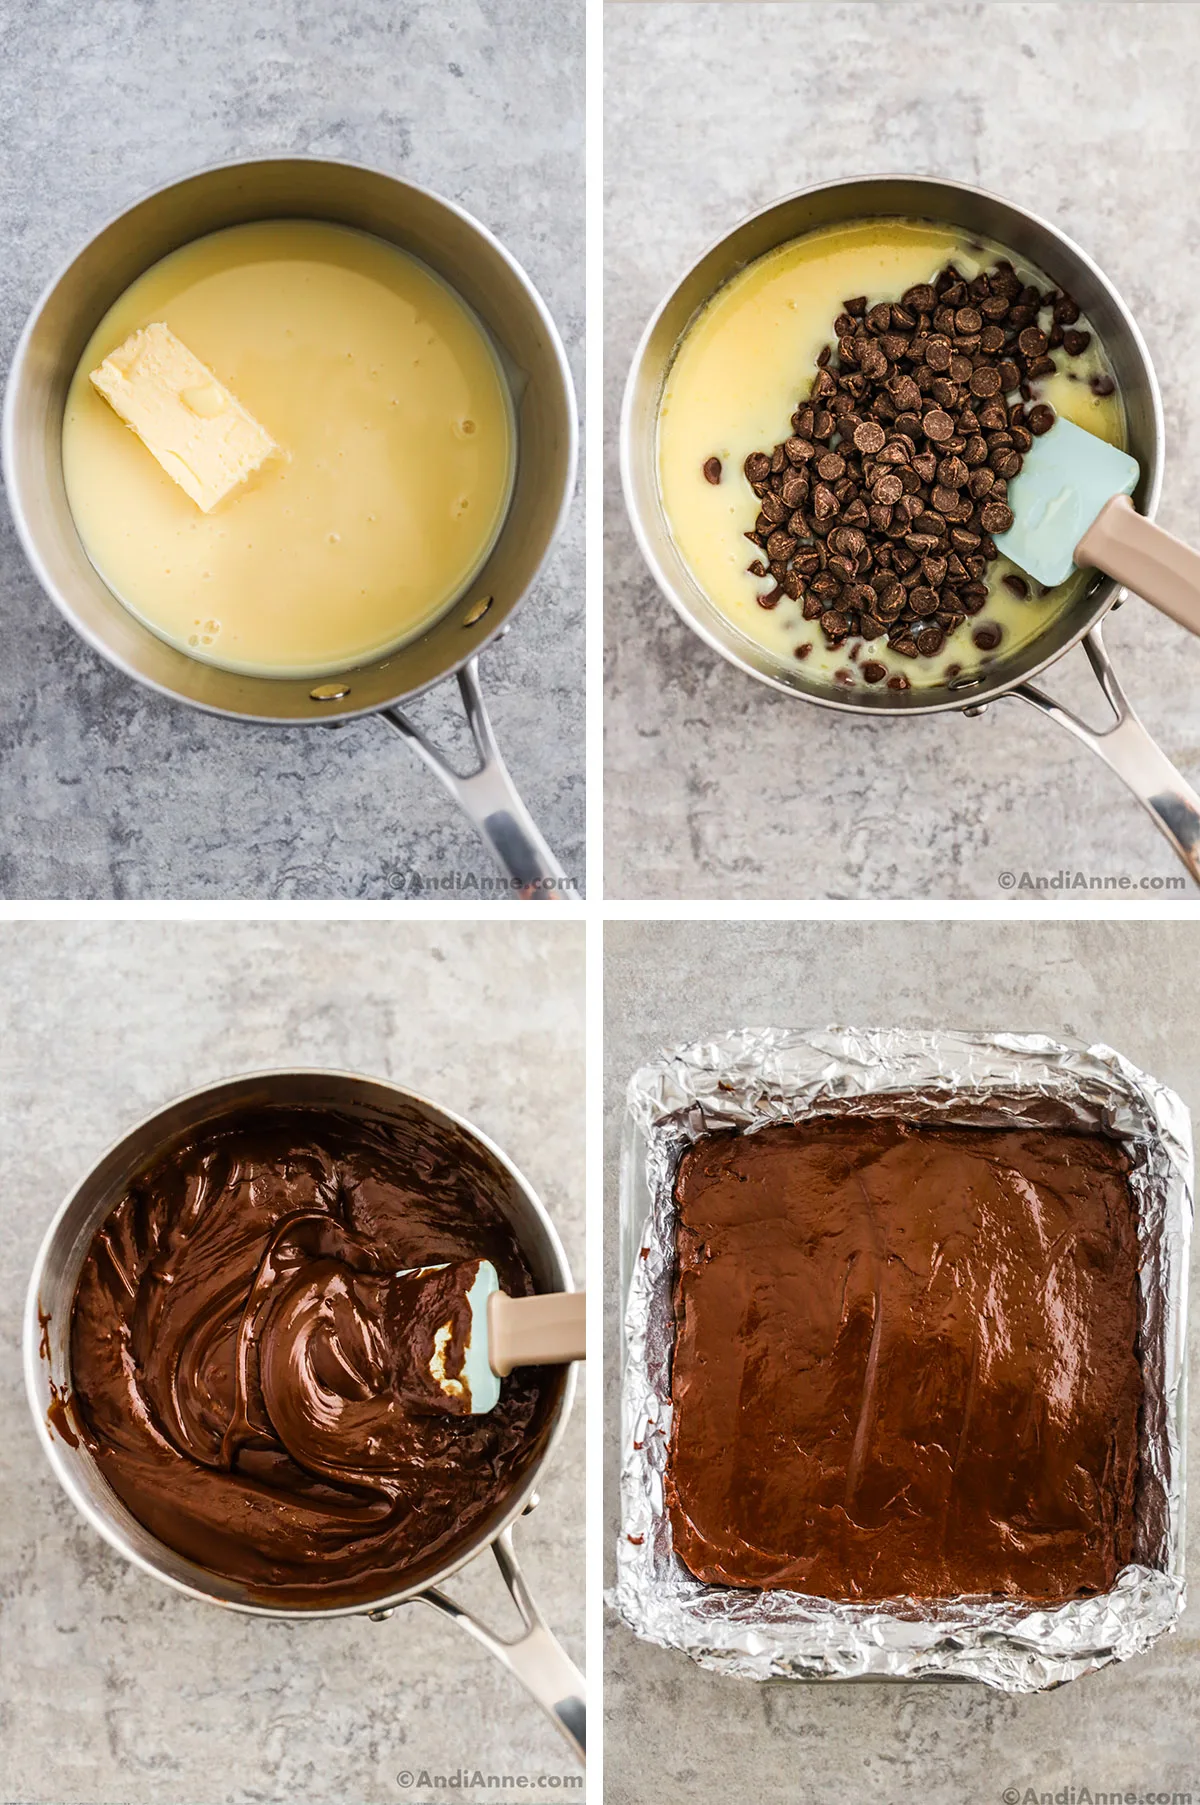 Four images showing steps. First is pot with milk and butter stick. Second is chocolate chips dumped over white liquid and spatula. Third is melted chocolate in a pot. Fourth is chocolate spread into square dish lined with aluminum foil.